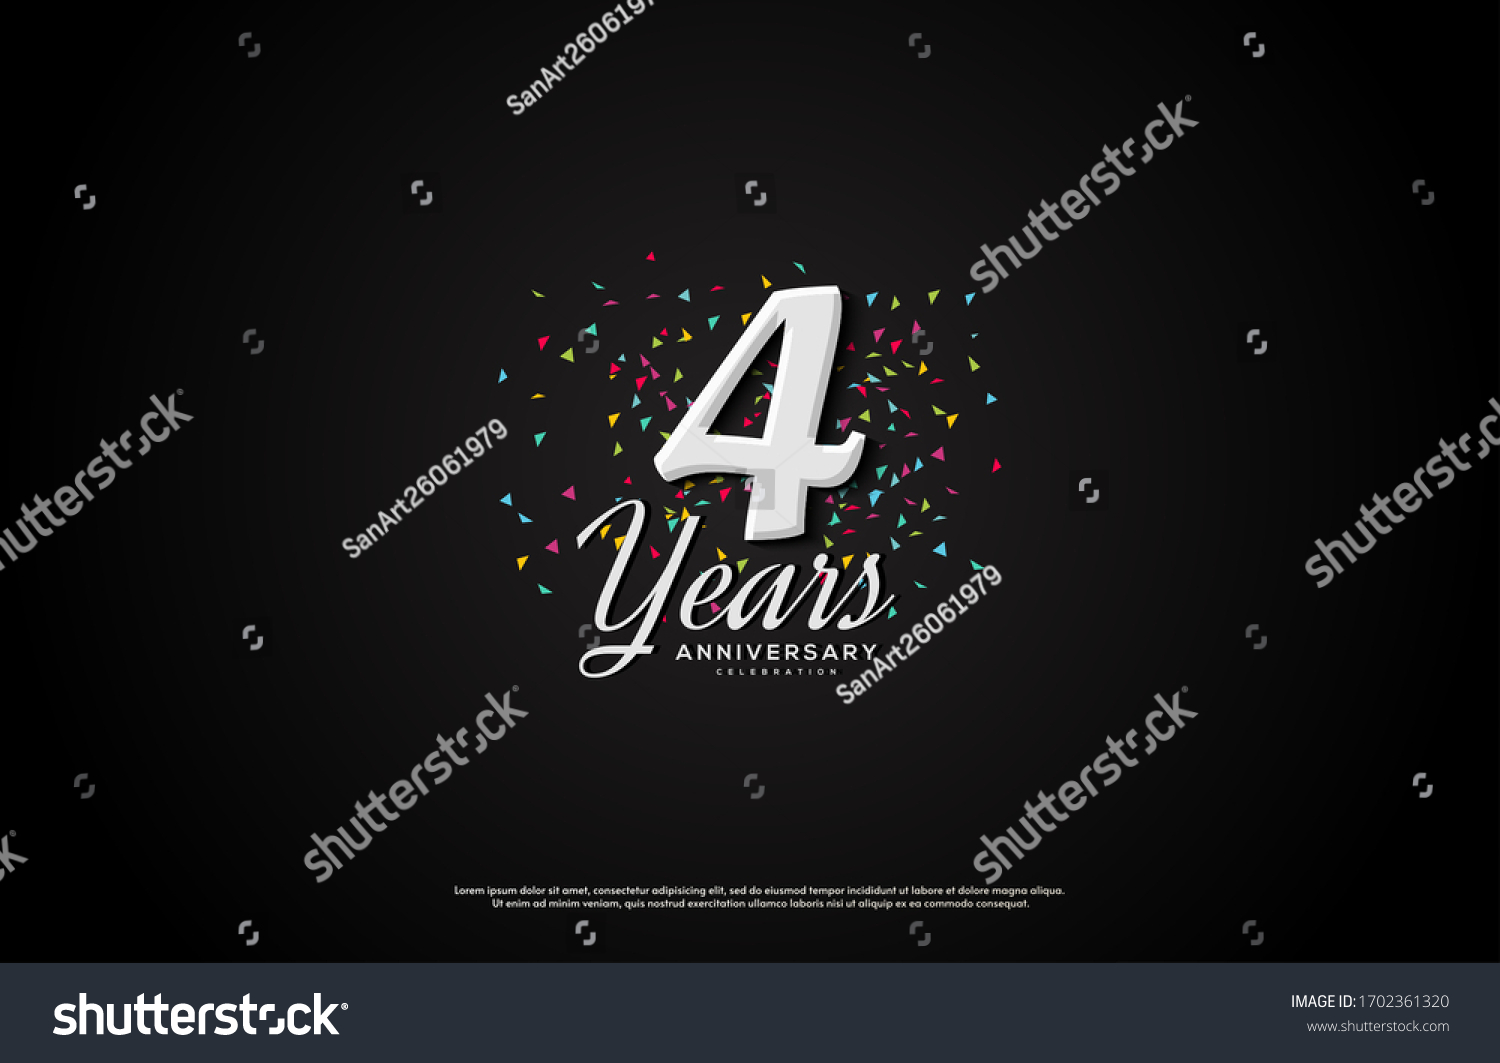 SVG of 4th anniversary background with illustrations of numbers and white writing on a black background. svg